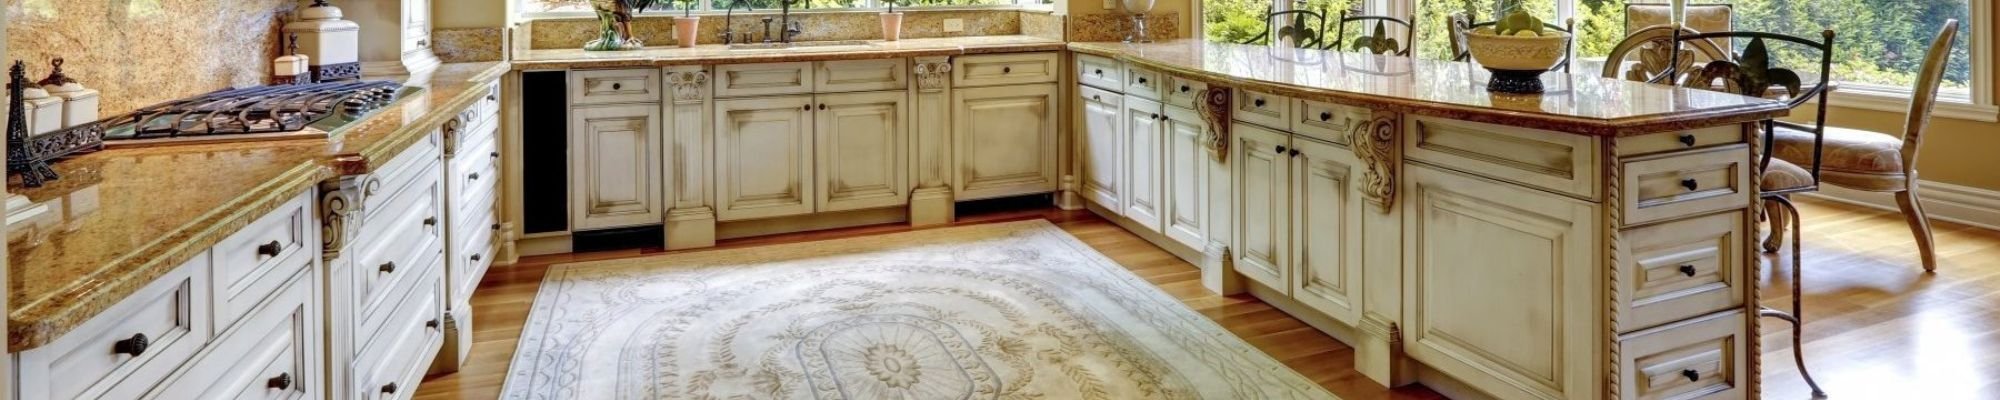 traditional kitchen area rug from Henson's Greater Tennessee Flooring in Knoxville TN